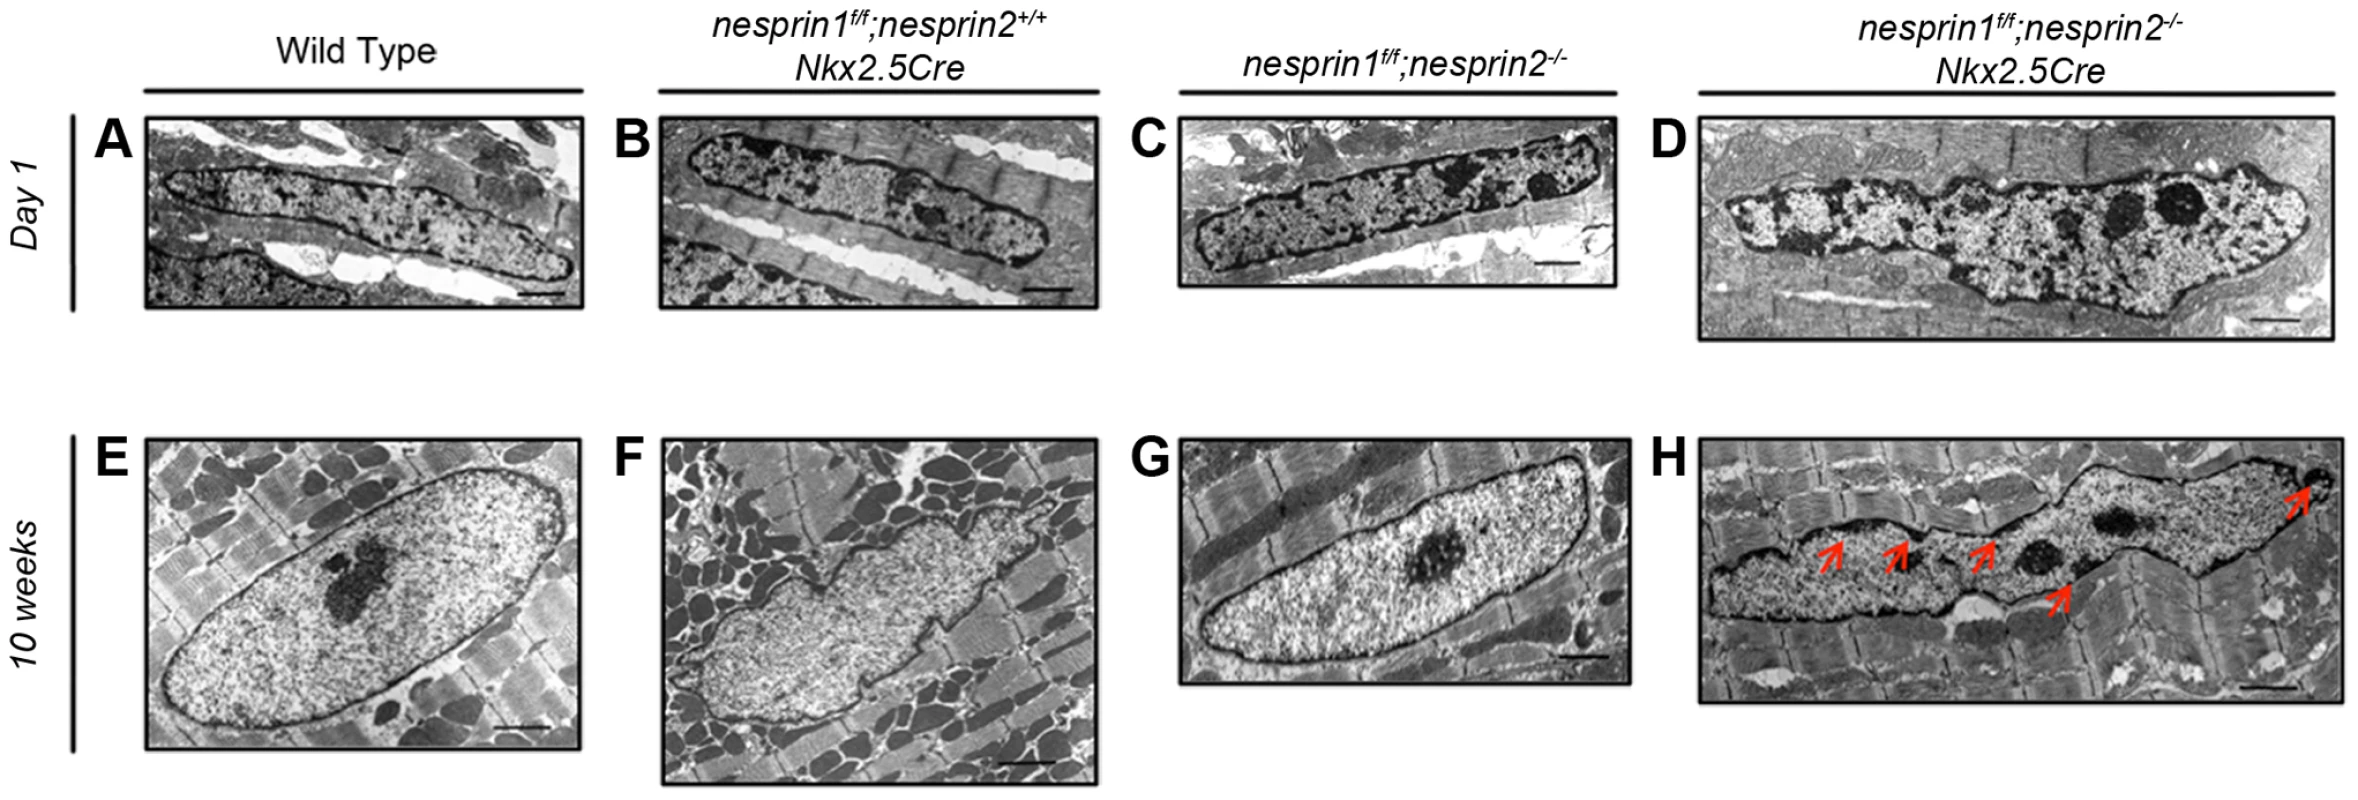 Examination of cardiomyocyte nuclear ultrastructure in response to loss of Nesprin 1 and/or 2.